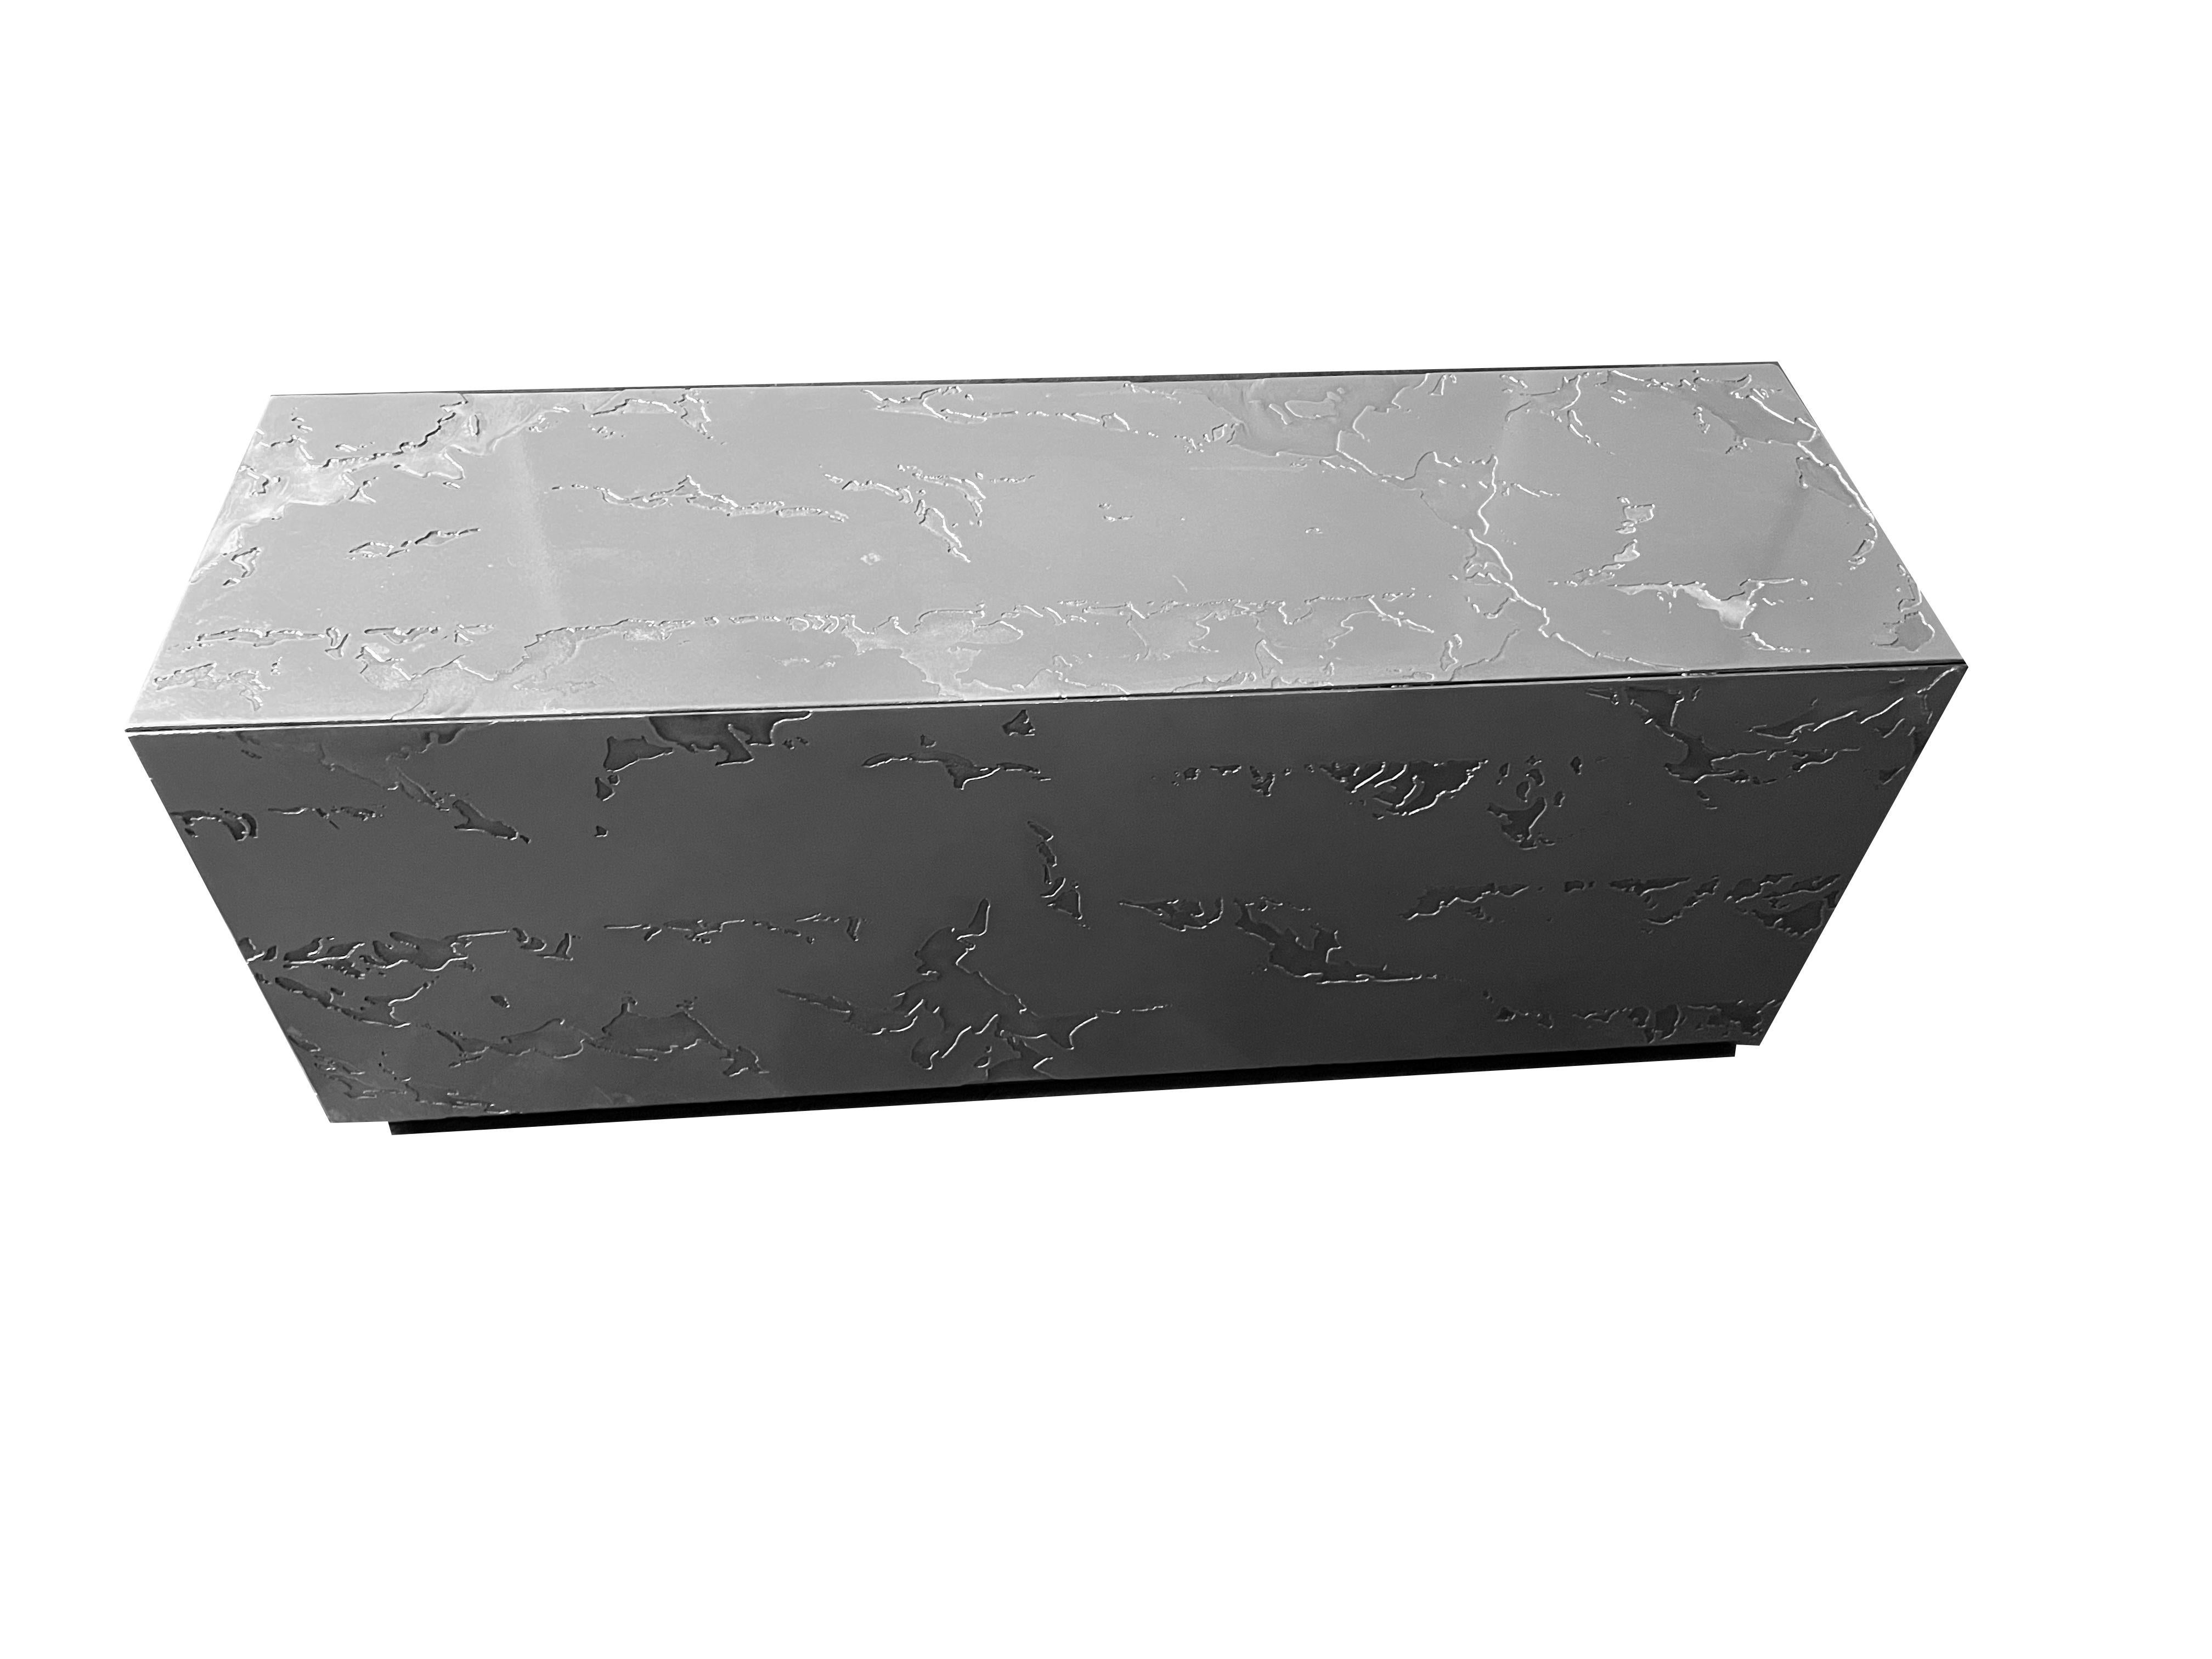 Table Basse et Jardin Zen en Pierre D'acier Medium by Chanel Kapitanj
Materials: Gray or black patinated steel. Glossy or matt varnish in the oven.
Dimensions: L100 x W 30 x H 40 cm.

Also available to measure, and in other shapes (cylinders,